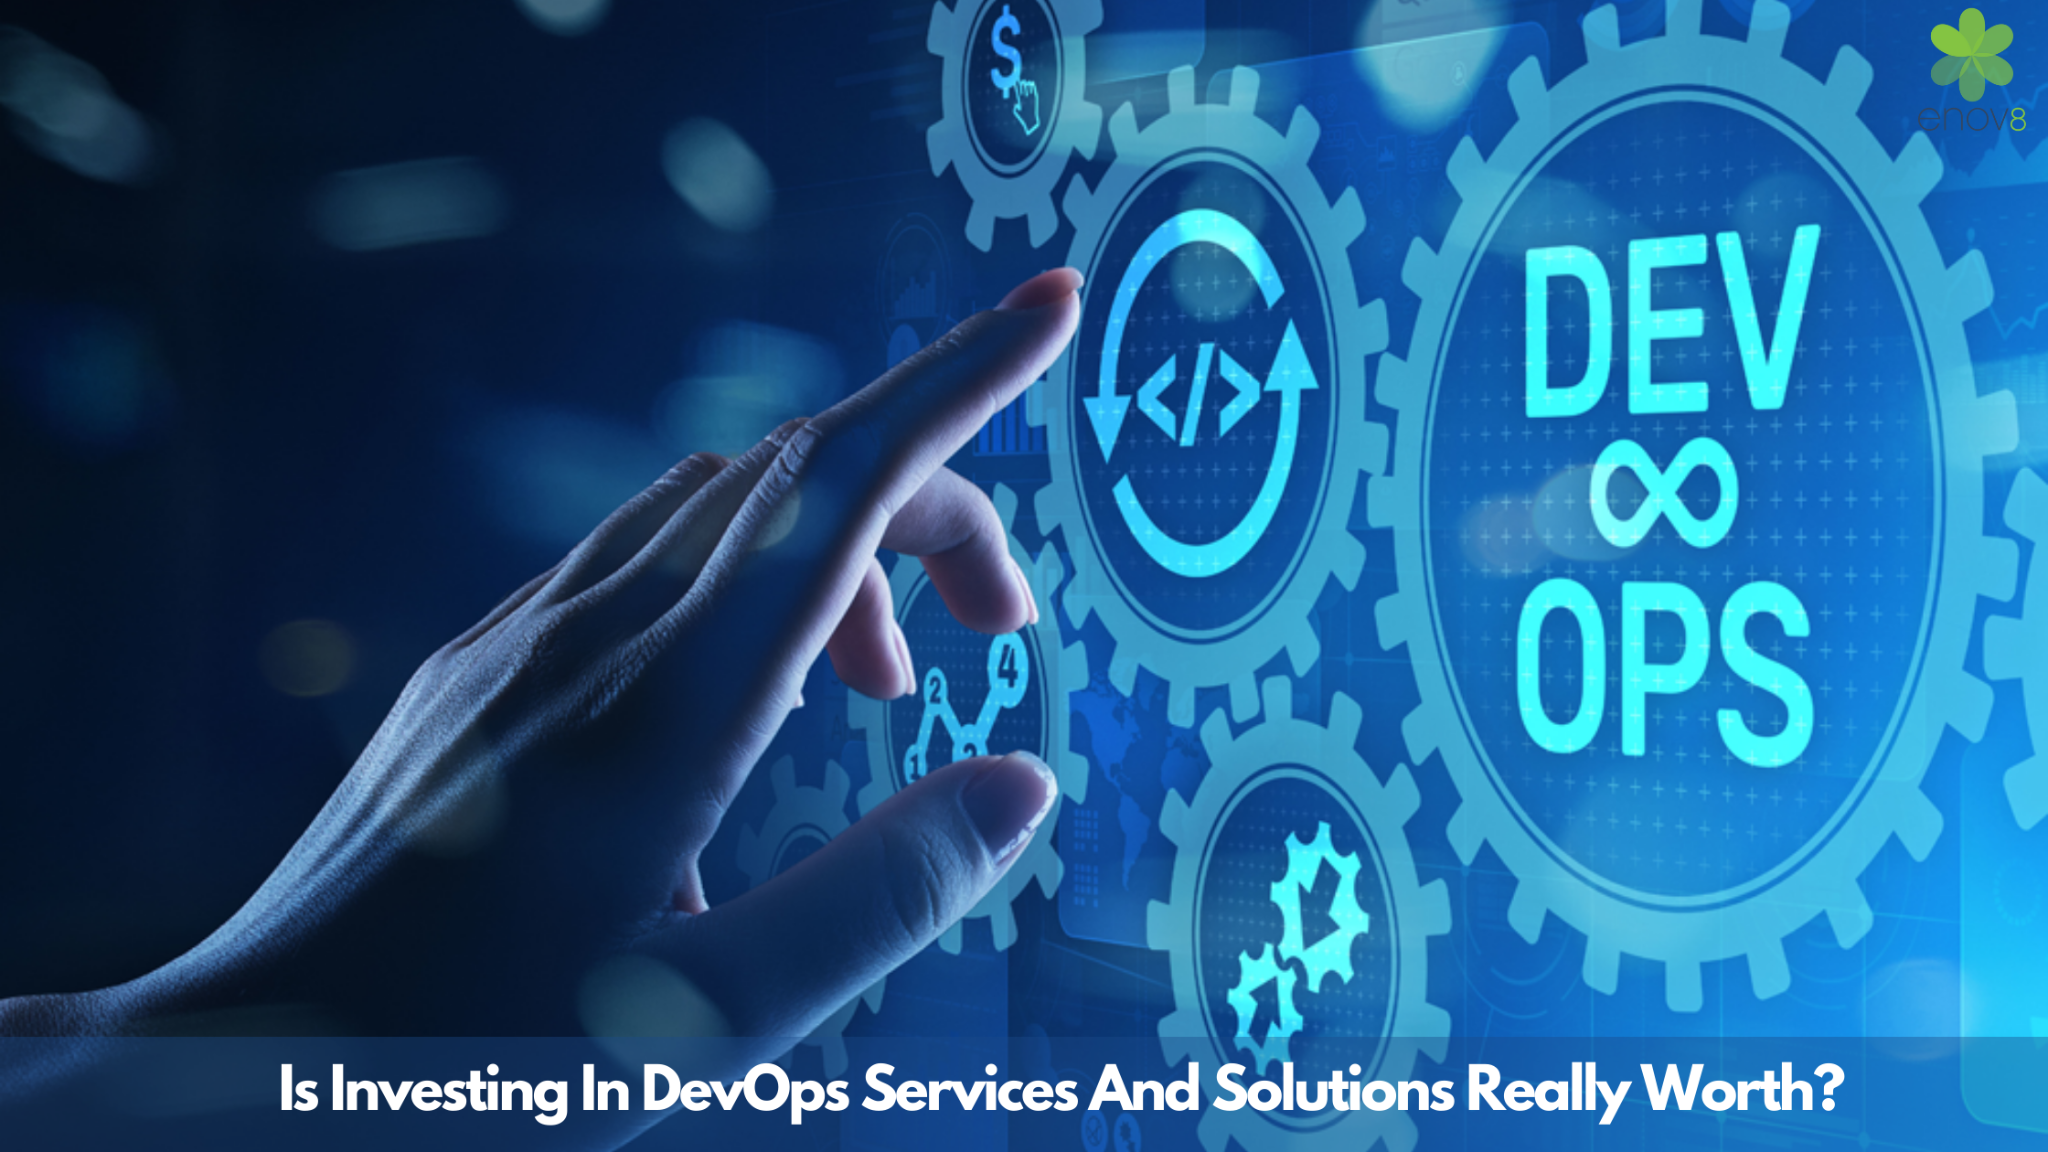 Is Investing In DevOps Services And Solutions Really Worth?